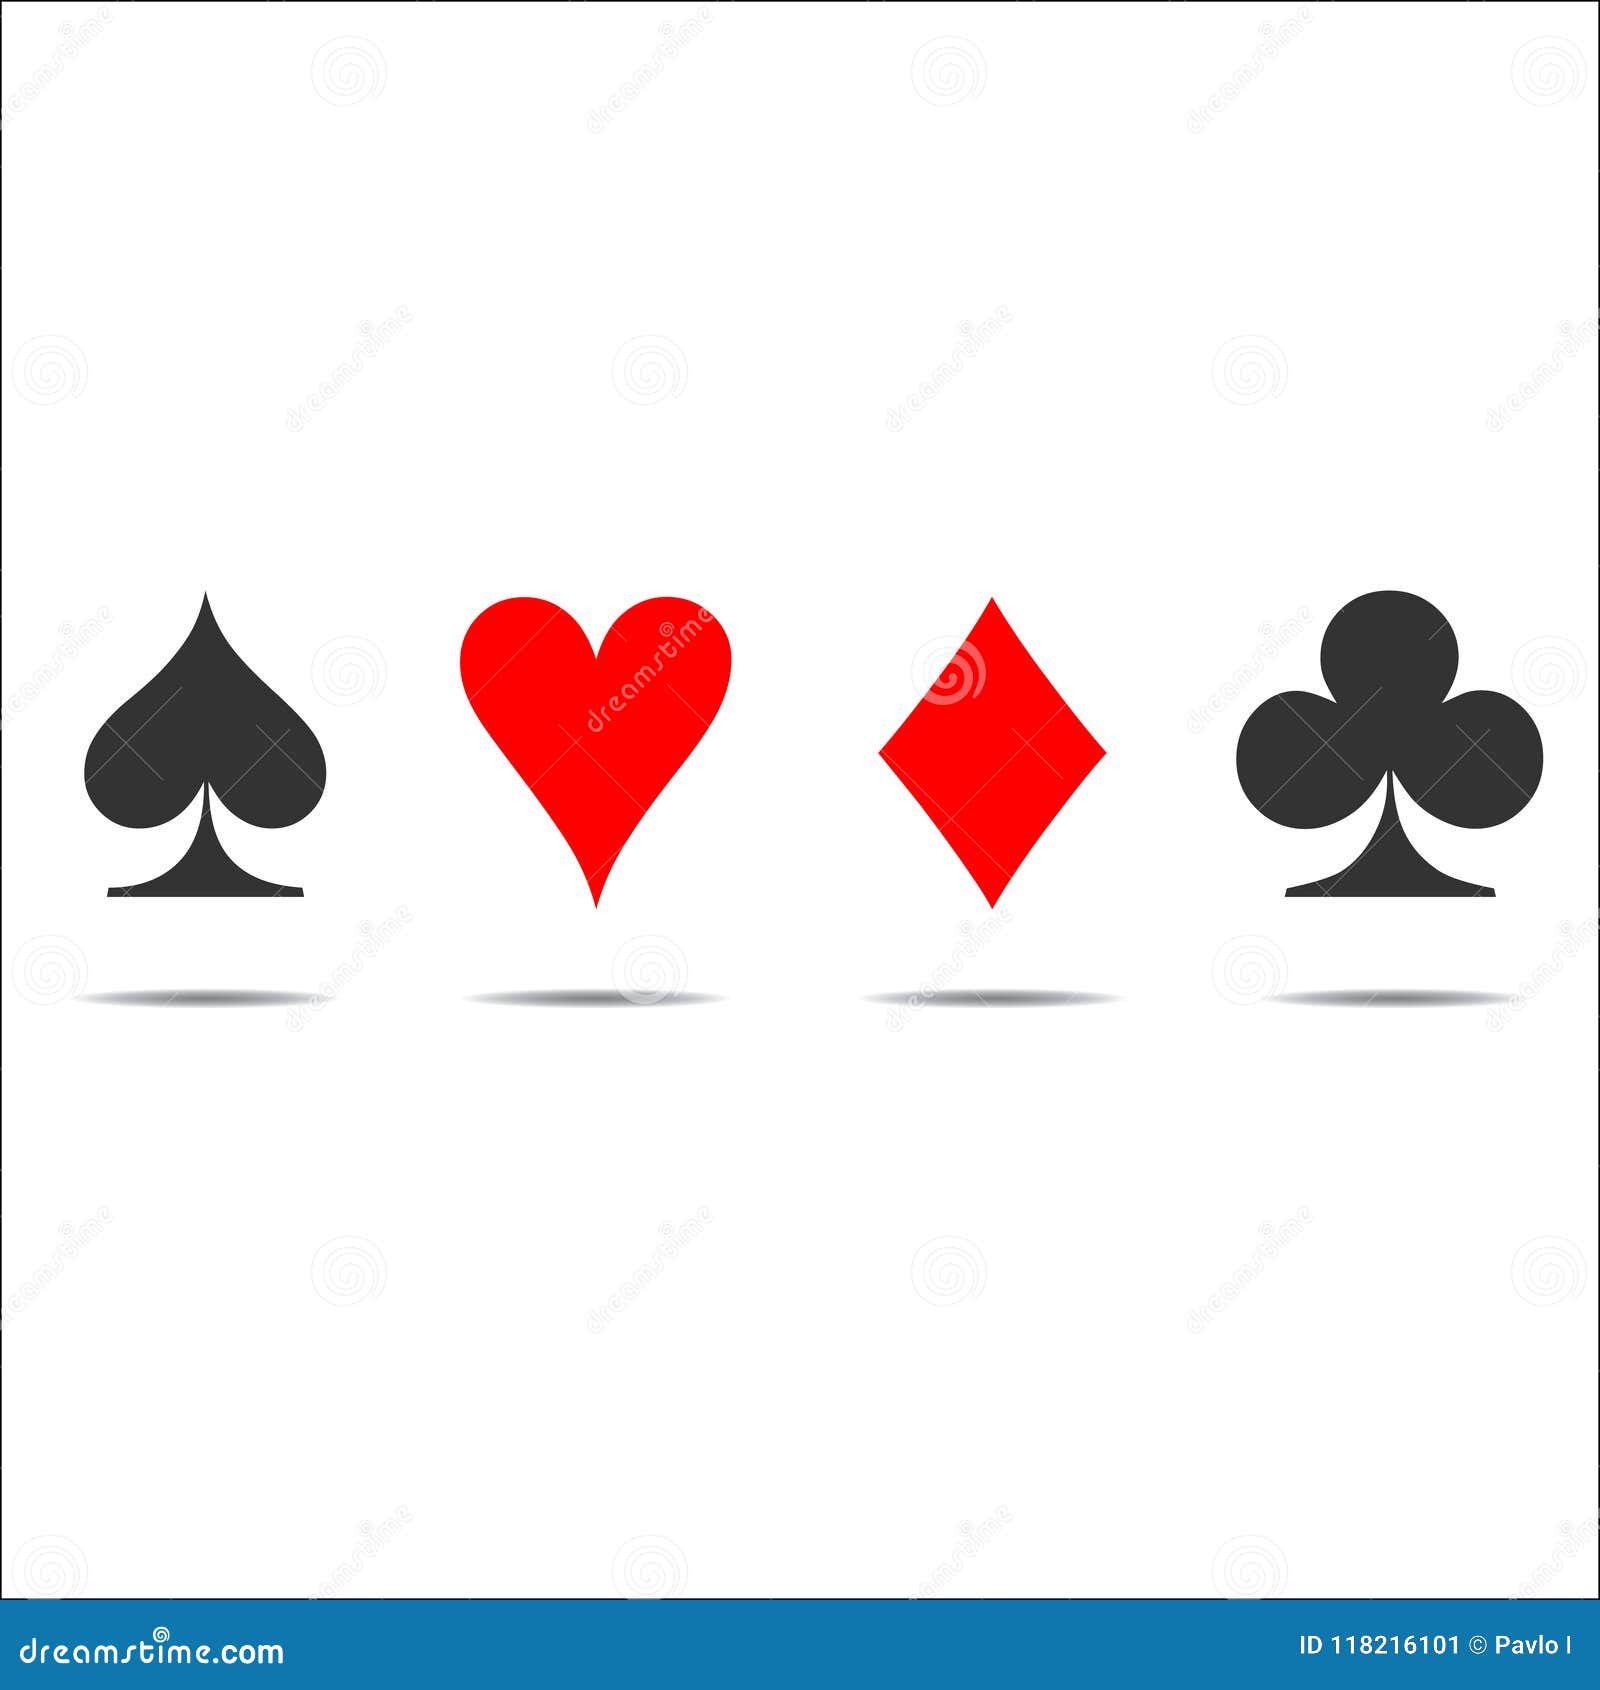 Colored Card Suit Icon Vector, Playing Cards Symbols Vector Stock ...